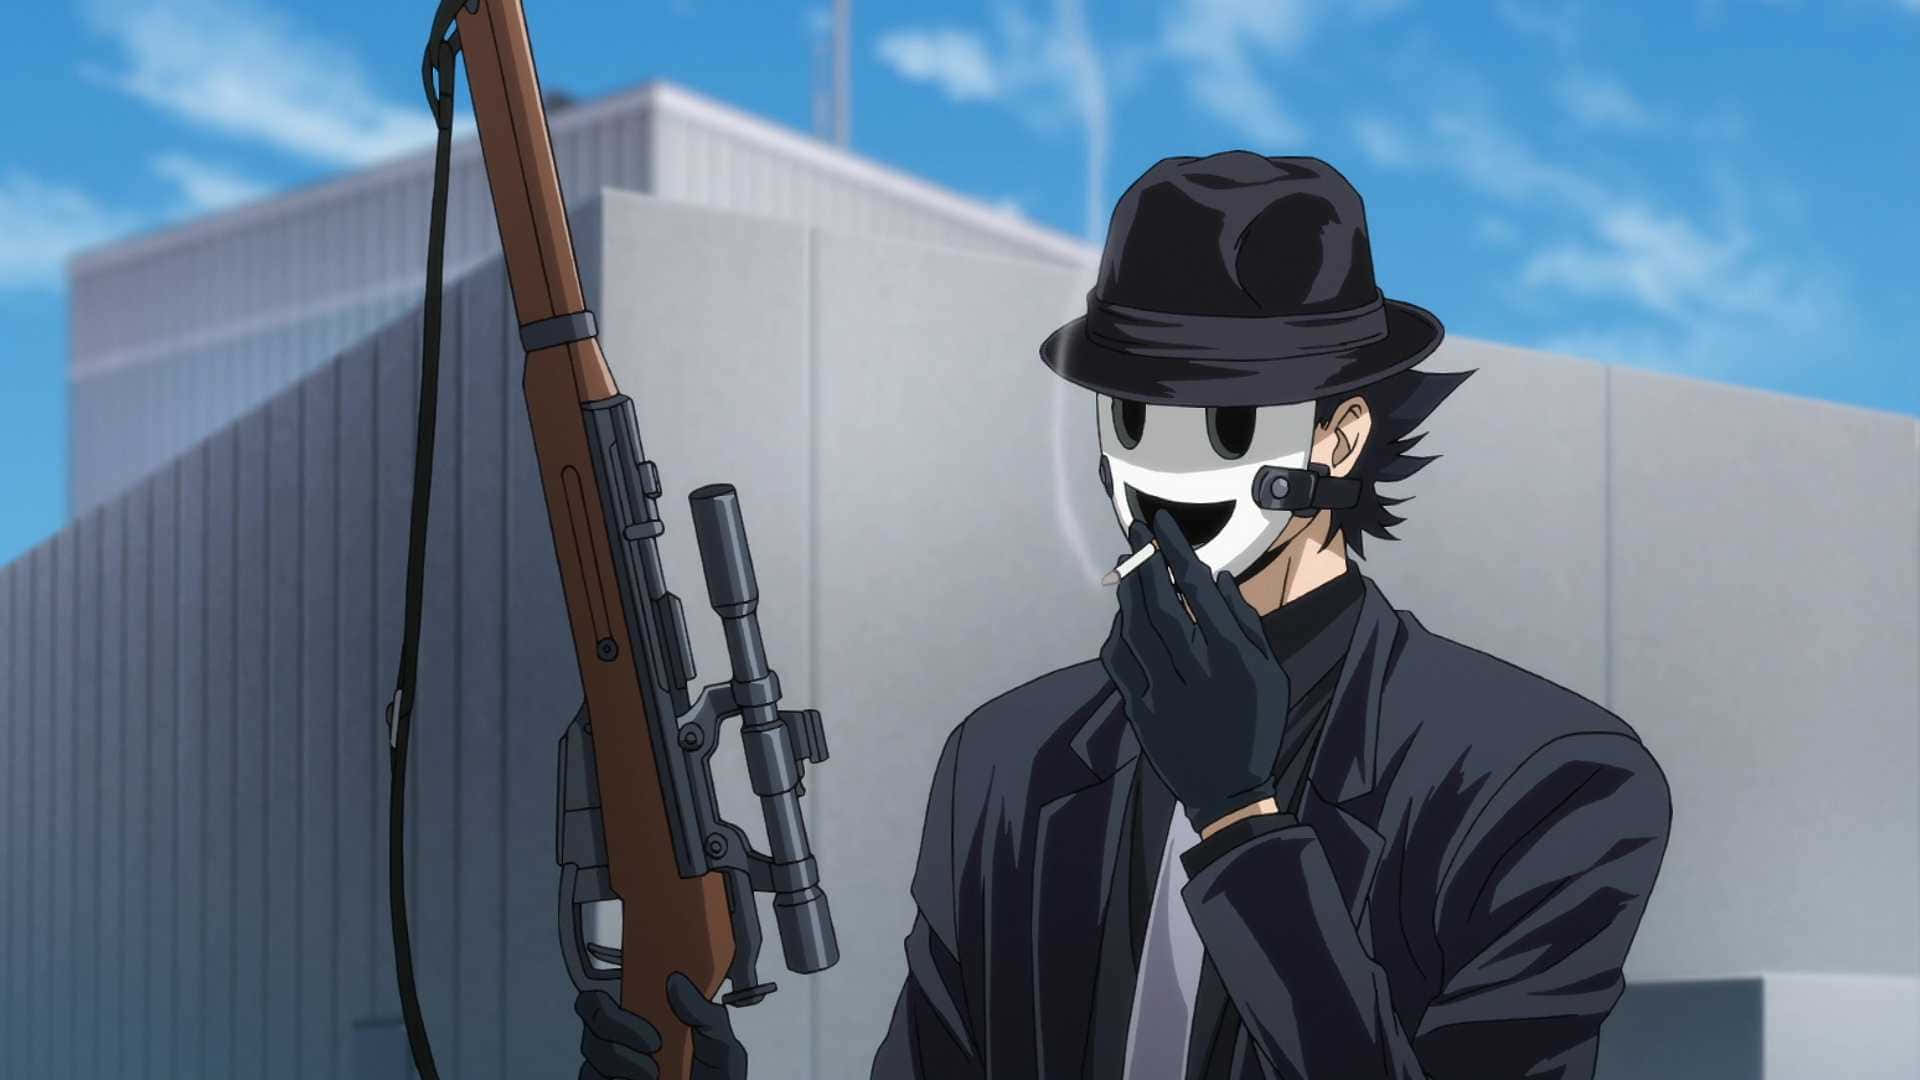 Sniper Mask Anime Characterwith Rifle Wallpaper